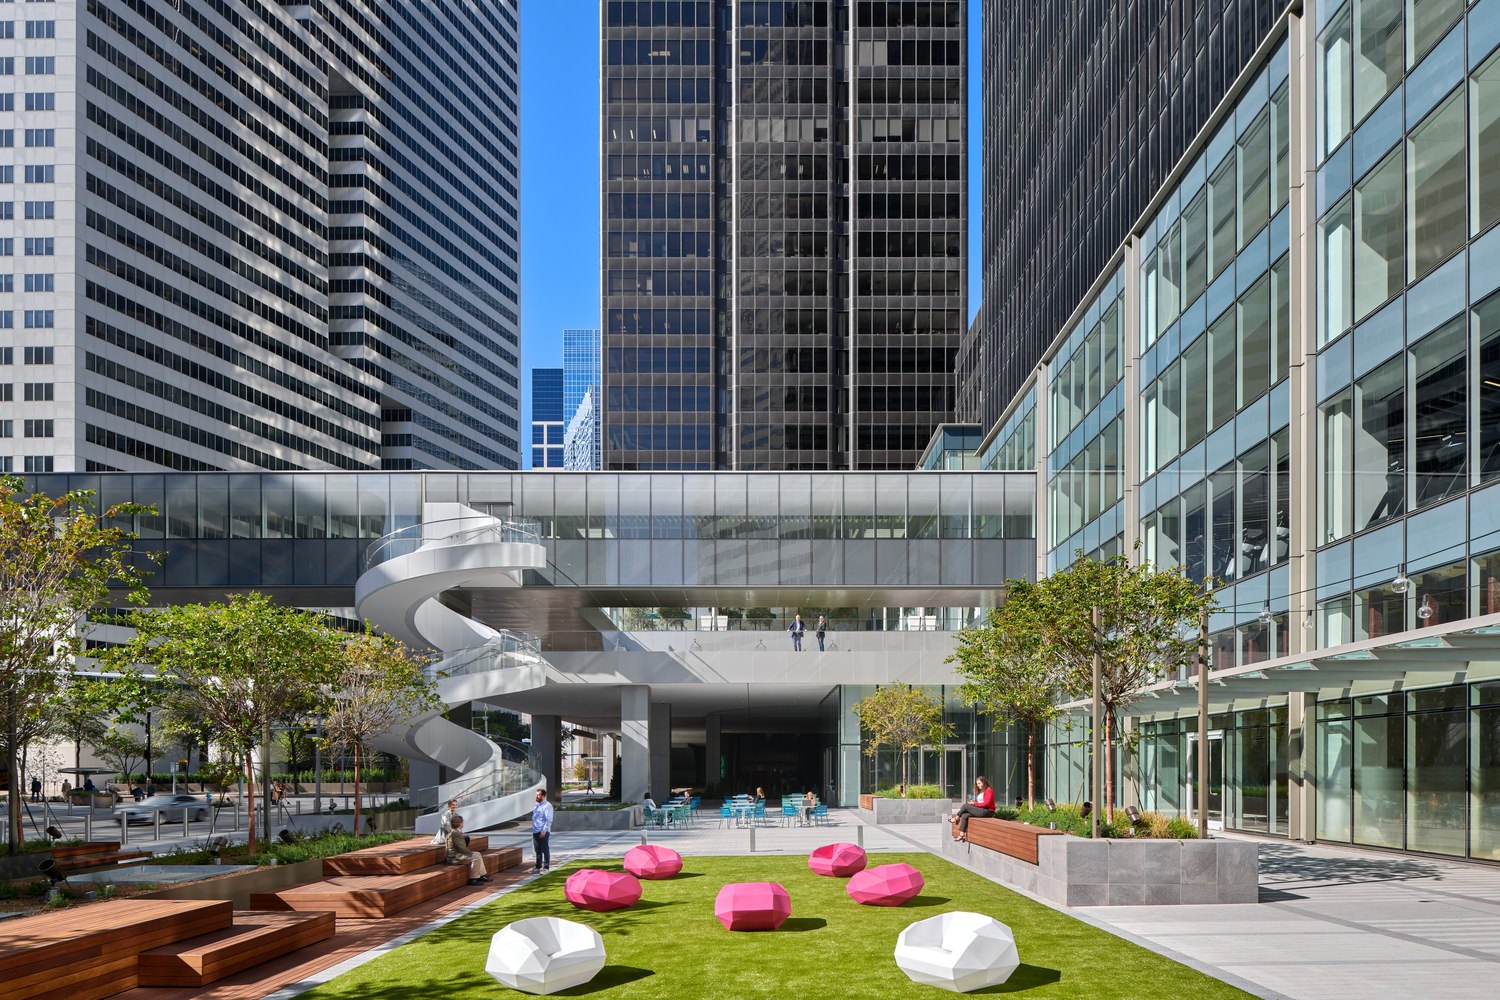 Render of the exterior of the building with a large outdoor lawn that has pink and white chairs.